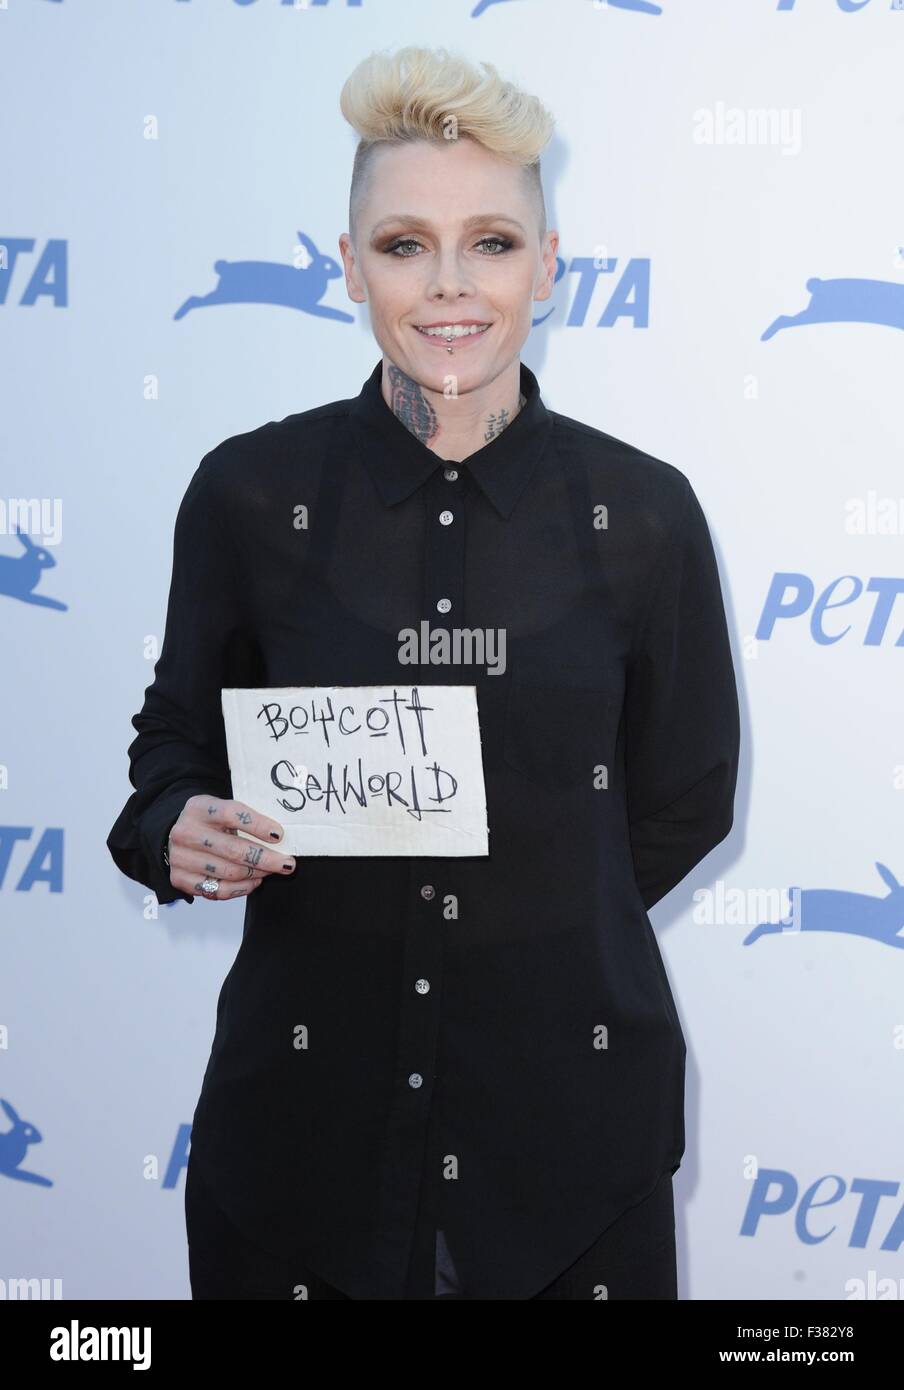 Los Angeles, CA, USA. 30th Sep, 2015. Otep Shamaya at arrivals for PETA's 35th Anniversary Gala, The Hollywood Palladium, Los Angeles, CA September 30, 2015. Credit:  Dee Cercone/Everett Collection/Alamy Live News Stock Photo